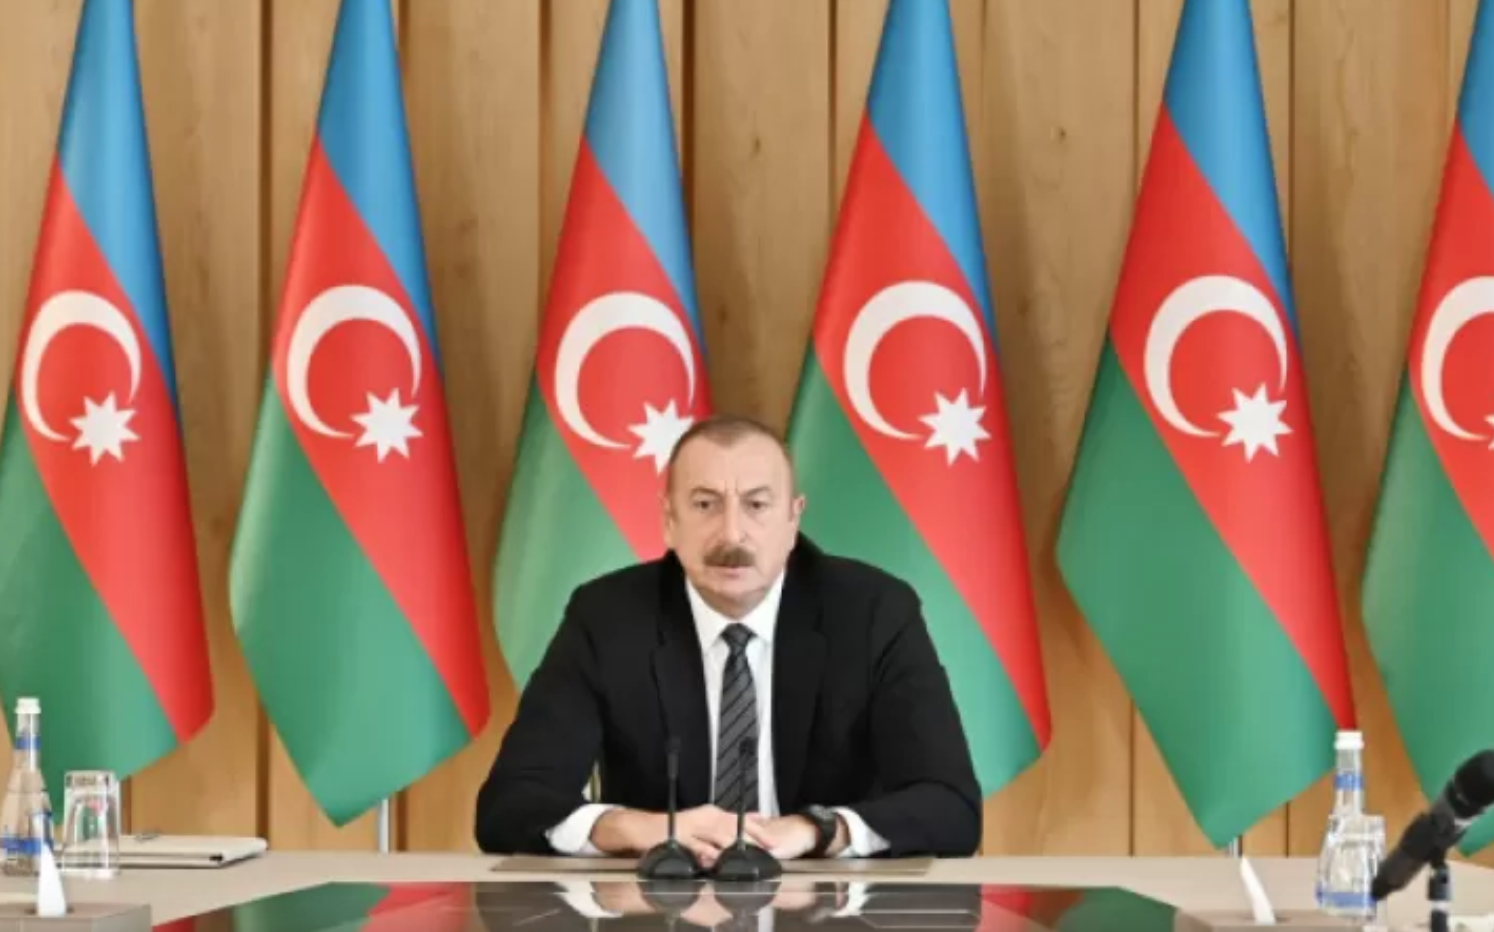 Ilham Aliyev talks on normalization of relations with Armenia